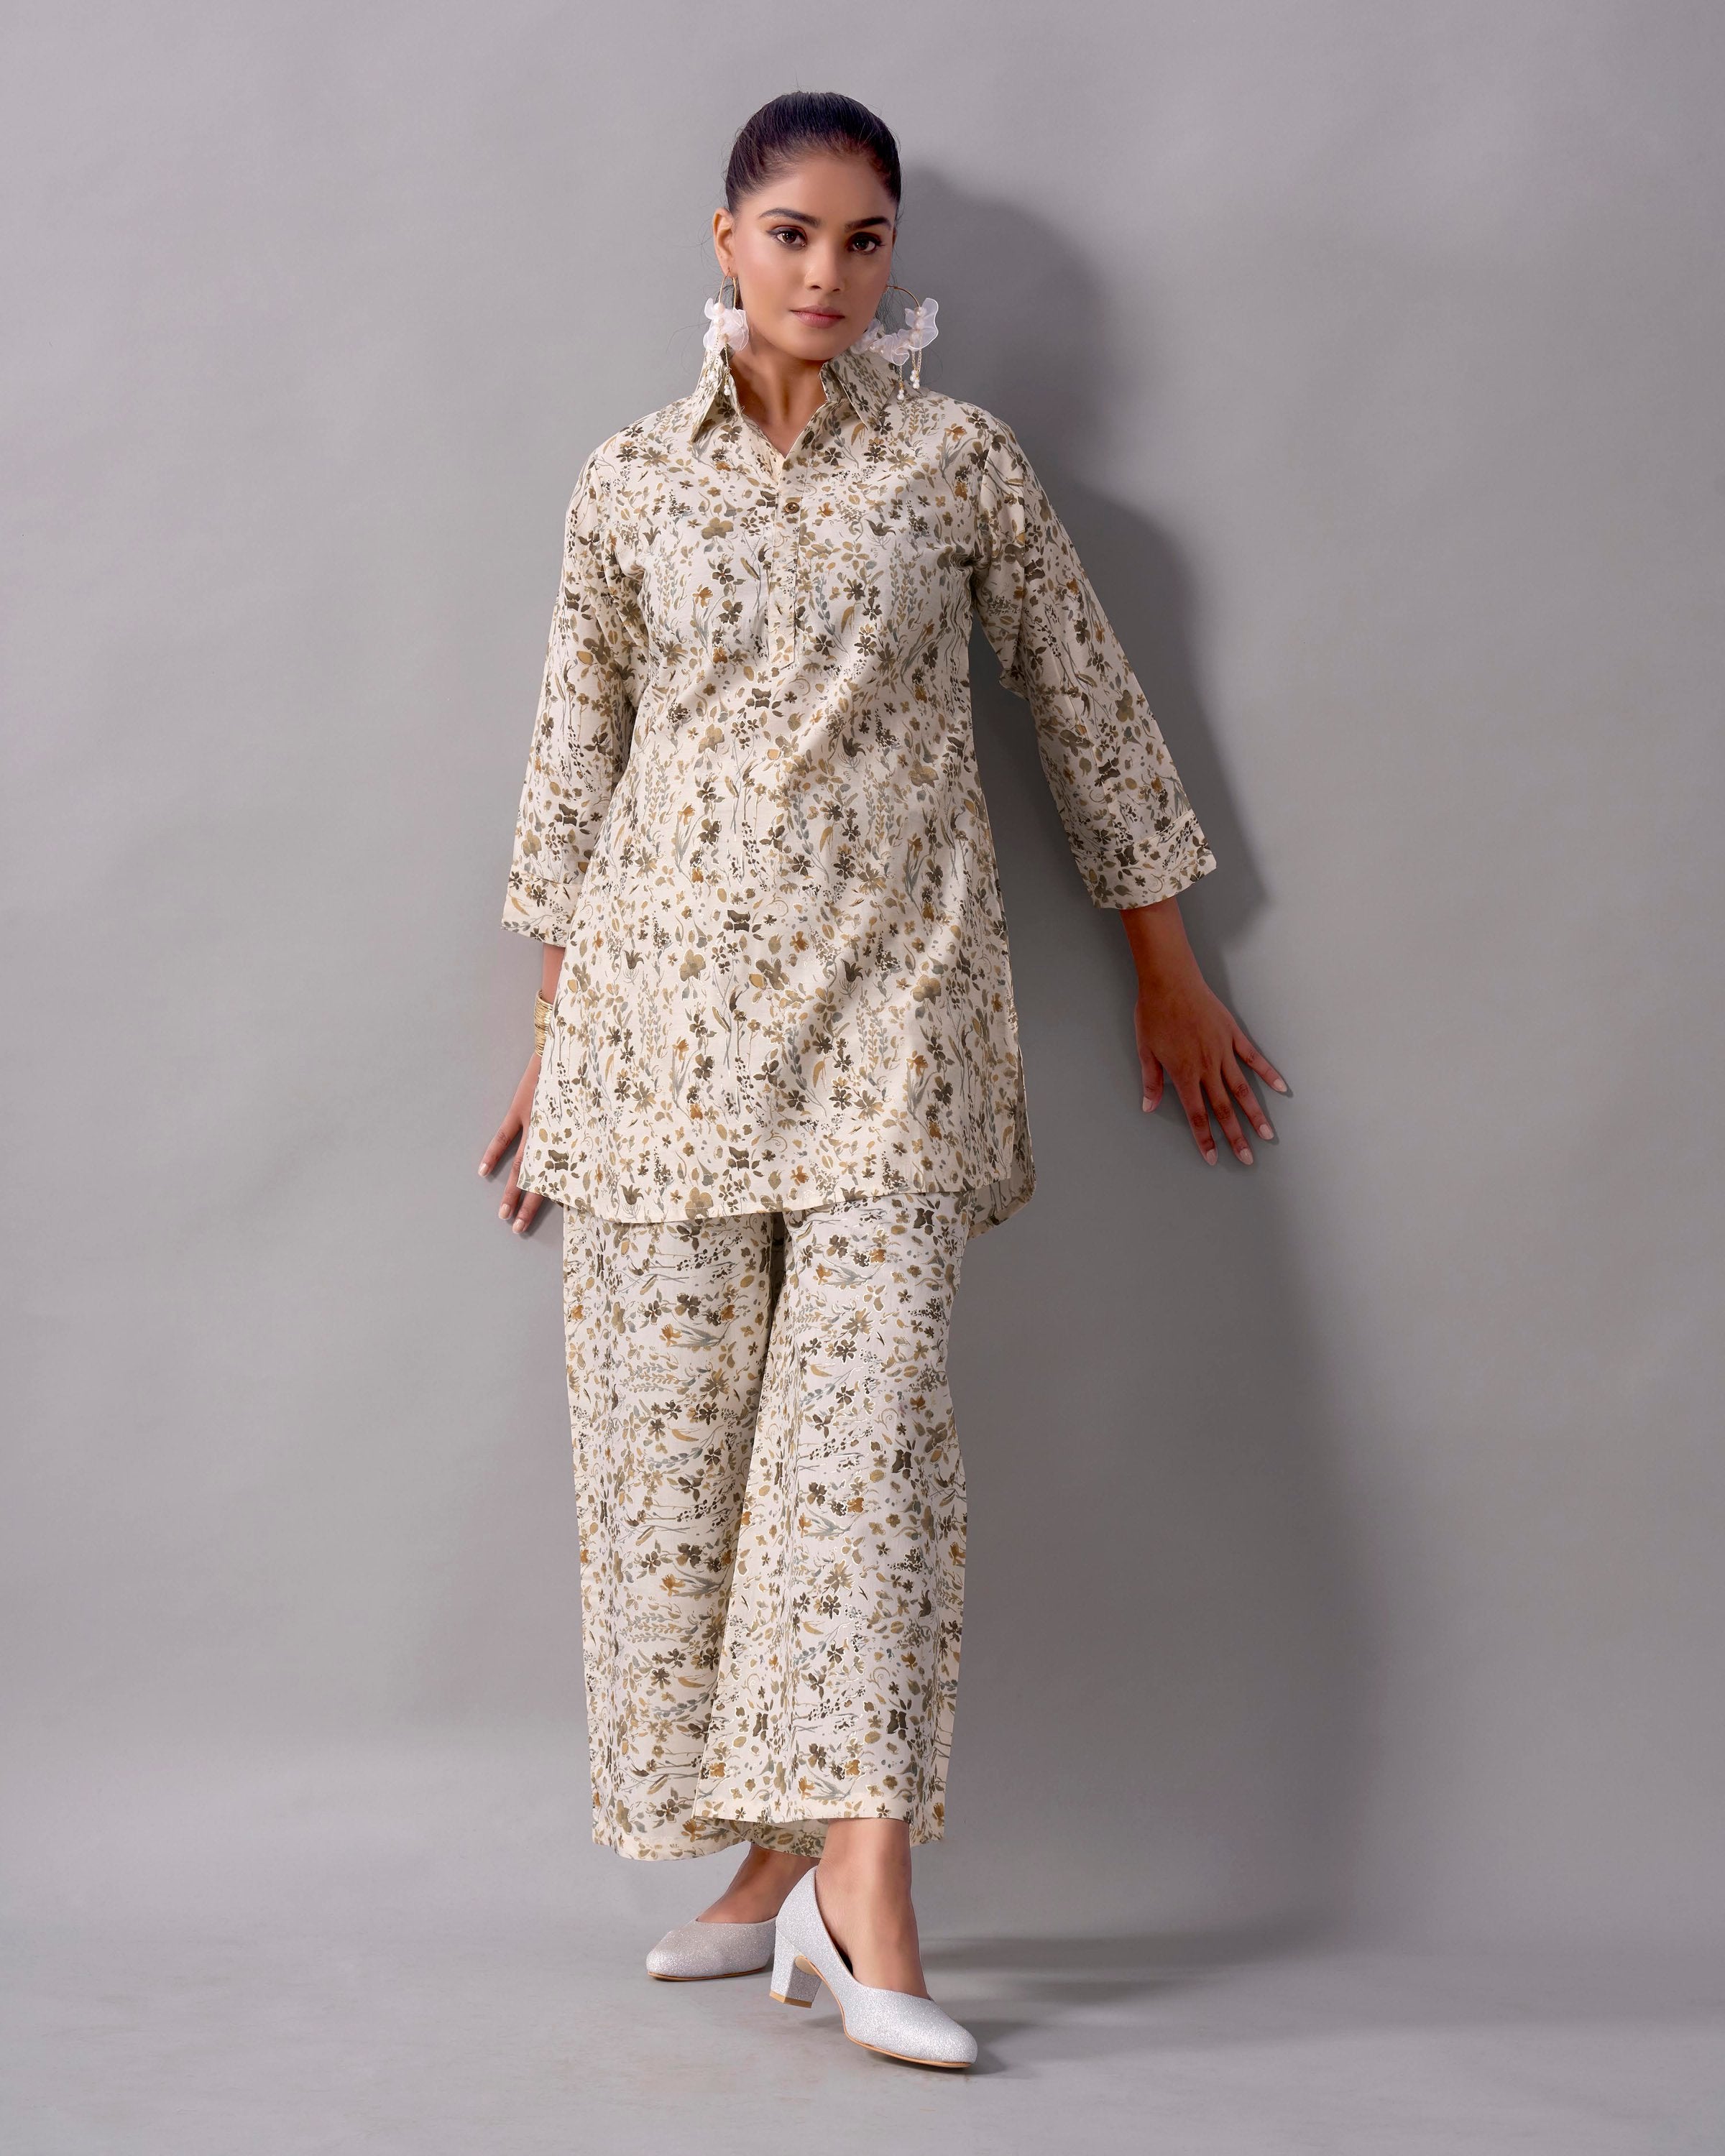 Floral Charm: Off-White Full Sleeve Co-ord Set with Collar Neckline